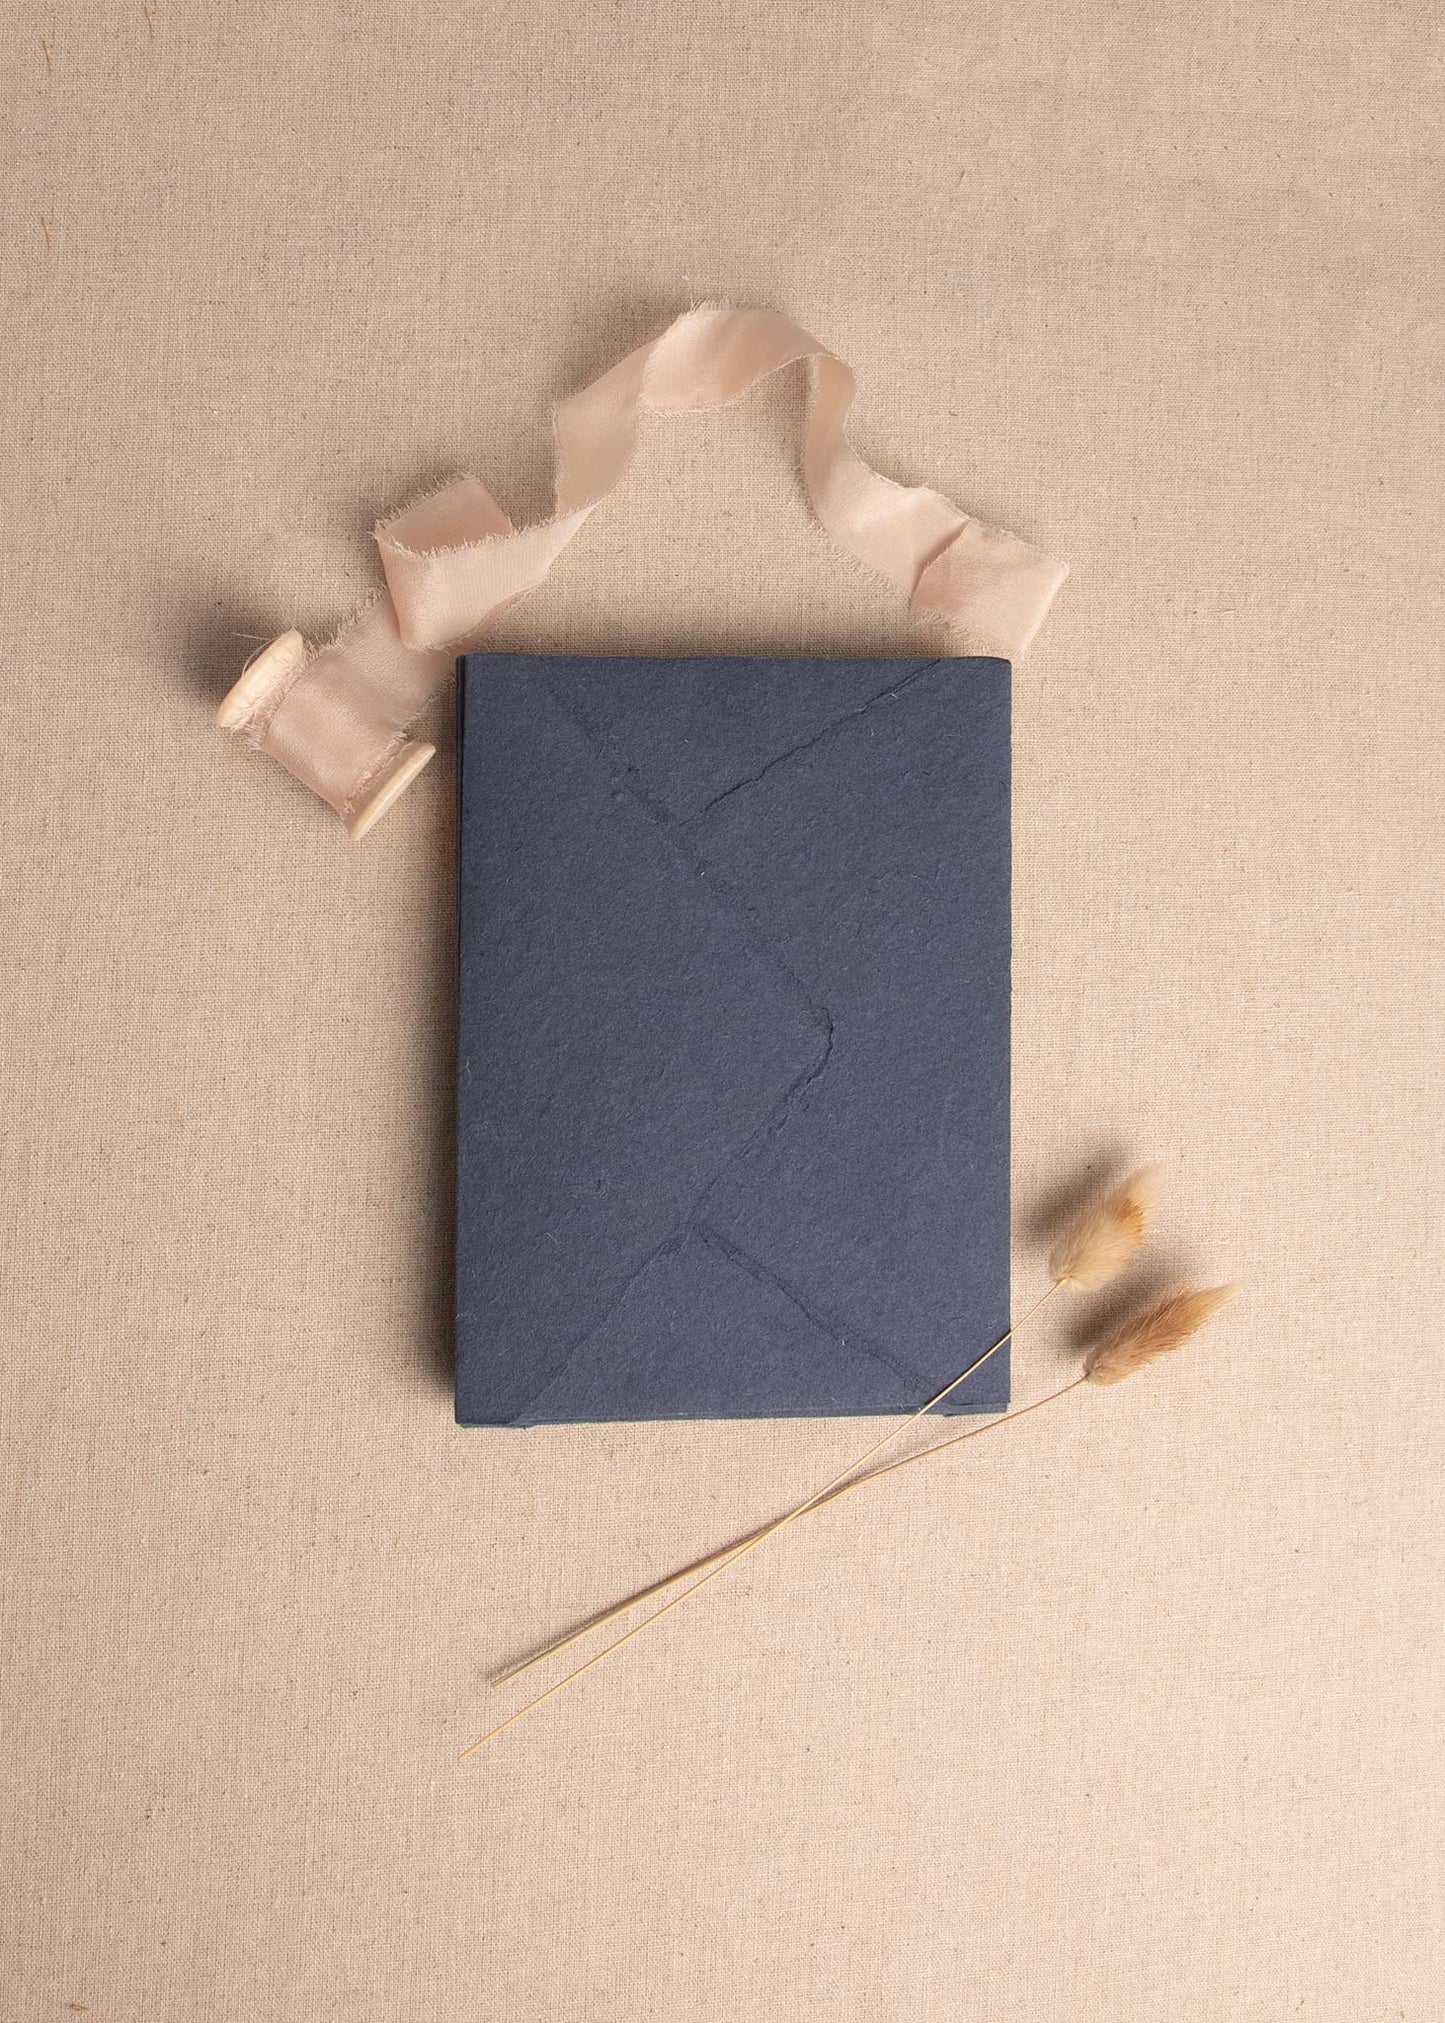 Singular 5x7 Dark Blue Handmade paper envelope with deckle edge surrounded by champagne colour silk ribbon spool and bunny tail dried flowers